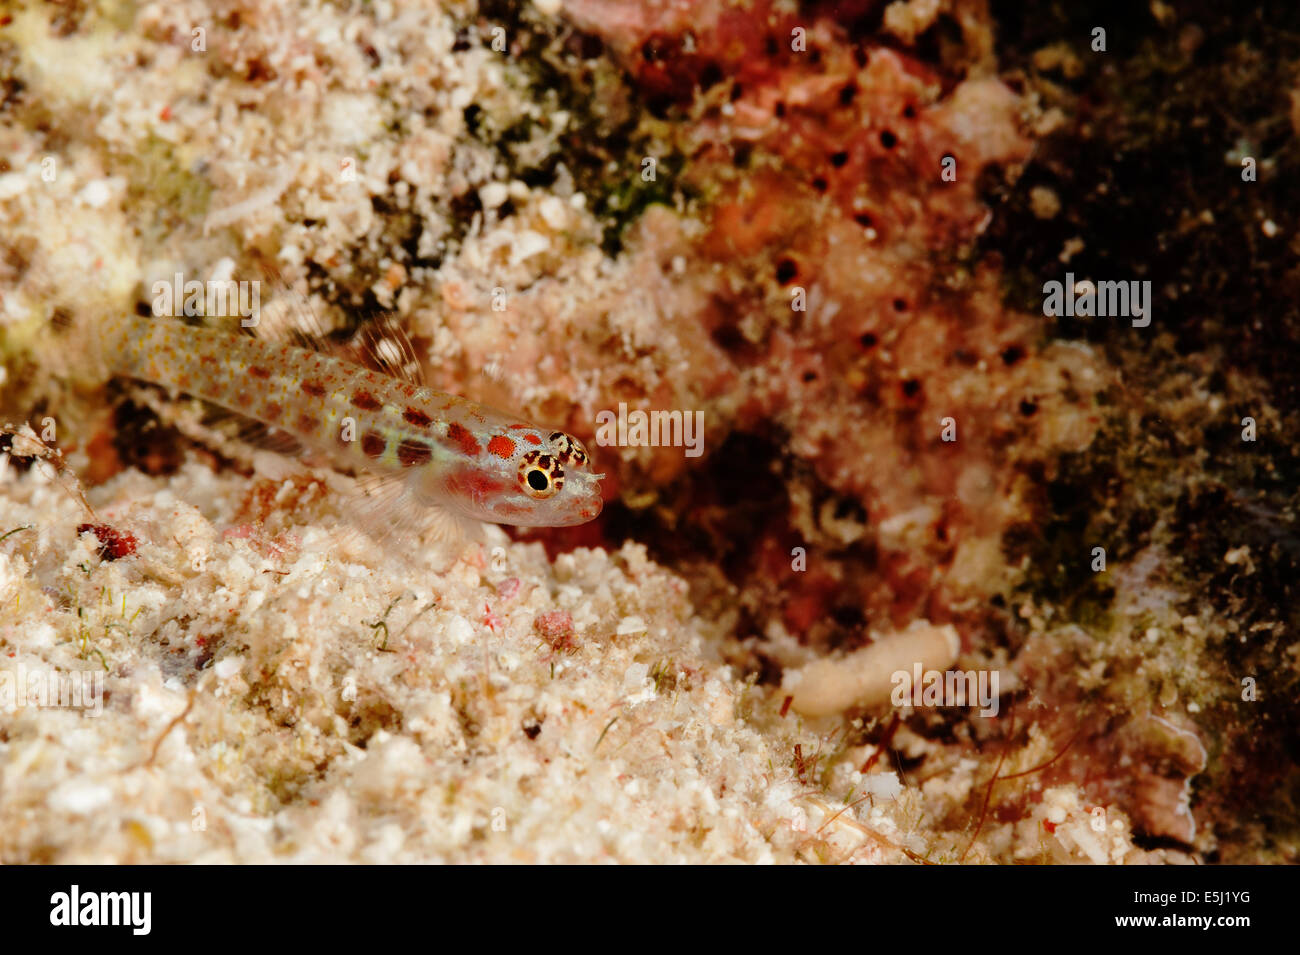 goby on sand in the Red Sea off Sudan coast Stock Photo